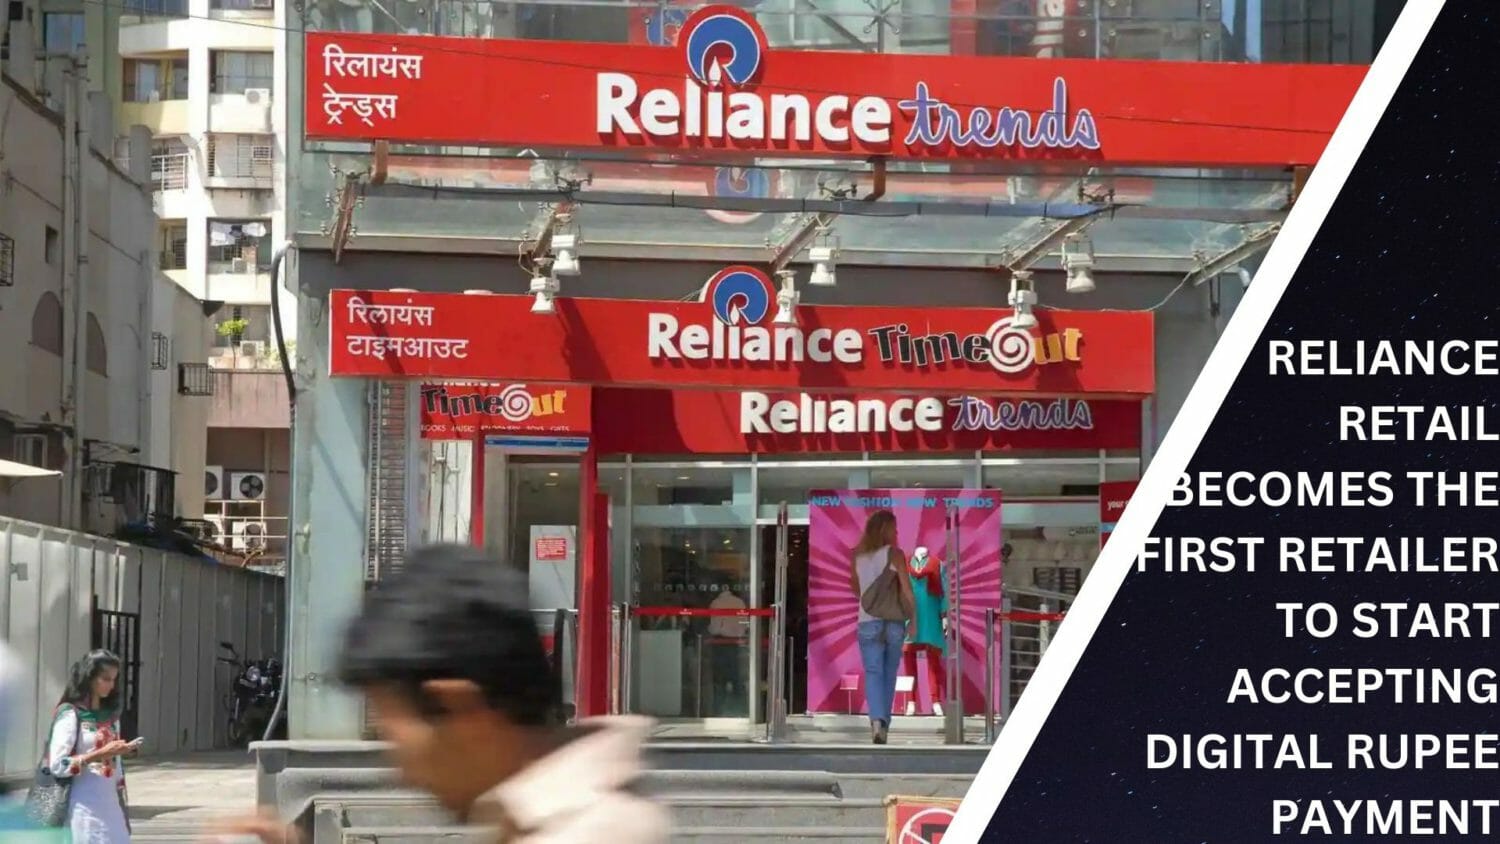 Reliance Retail Becomes The First Retailer To Start Accepting Digital Rupee Payment